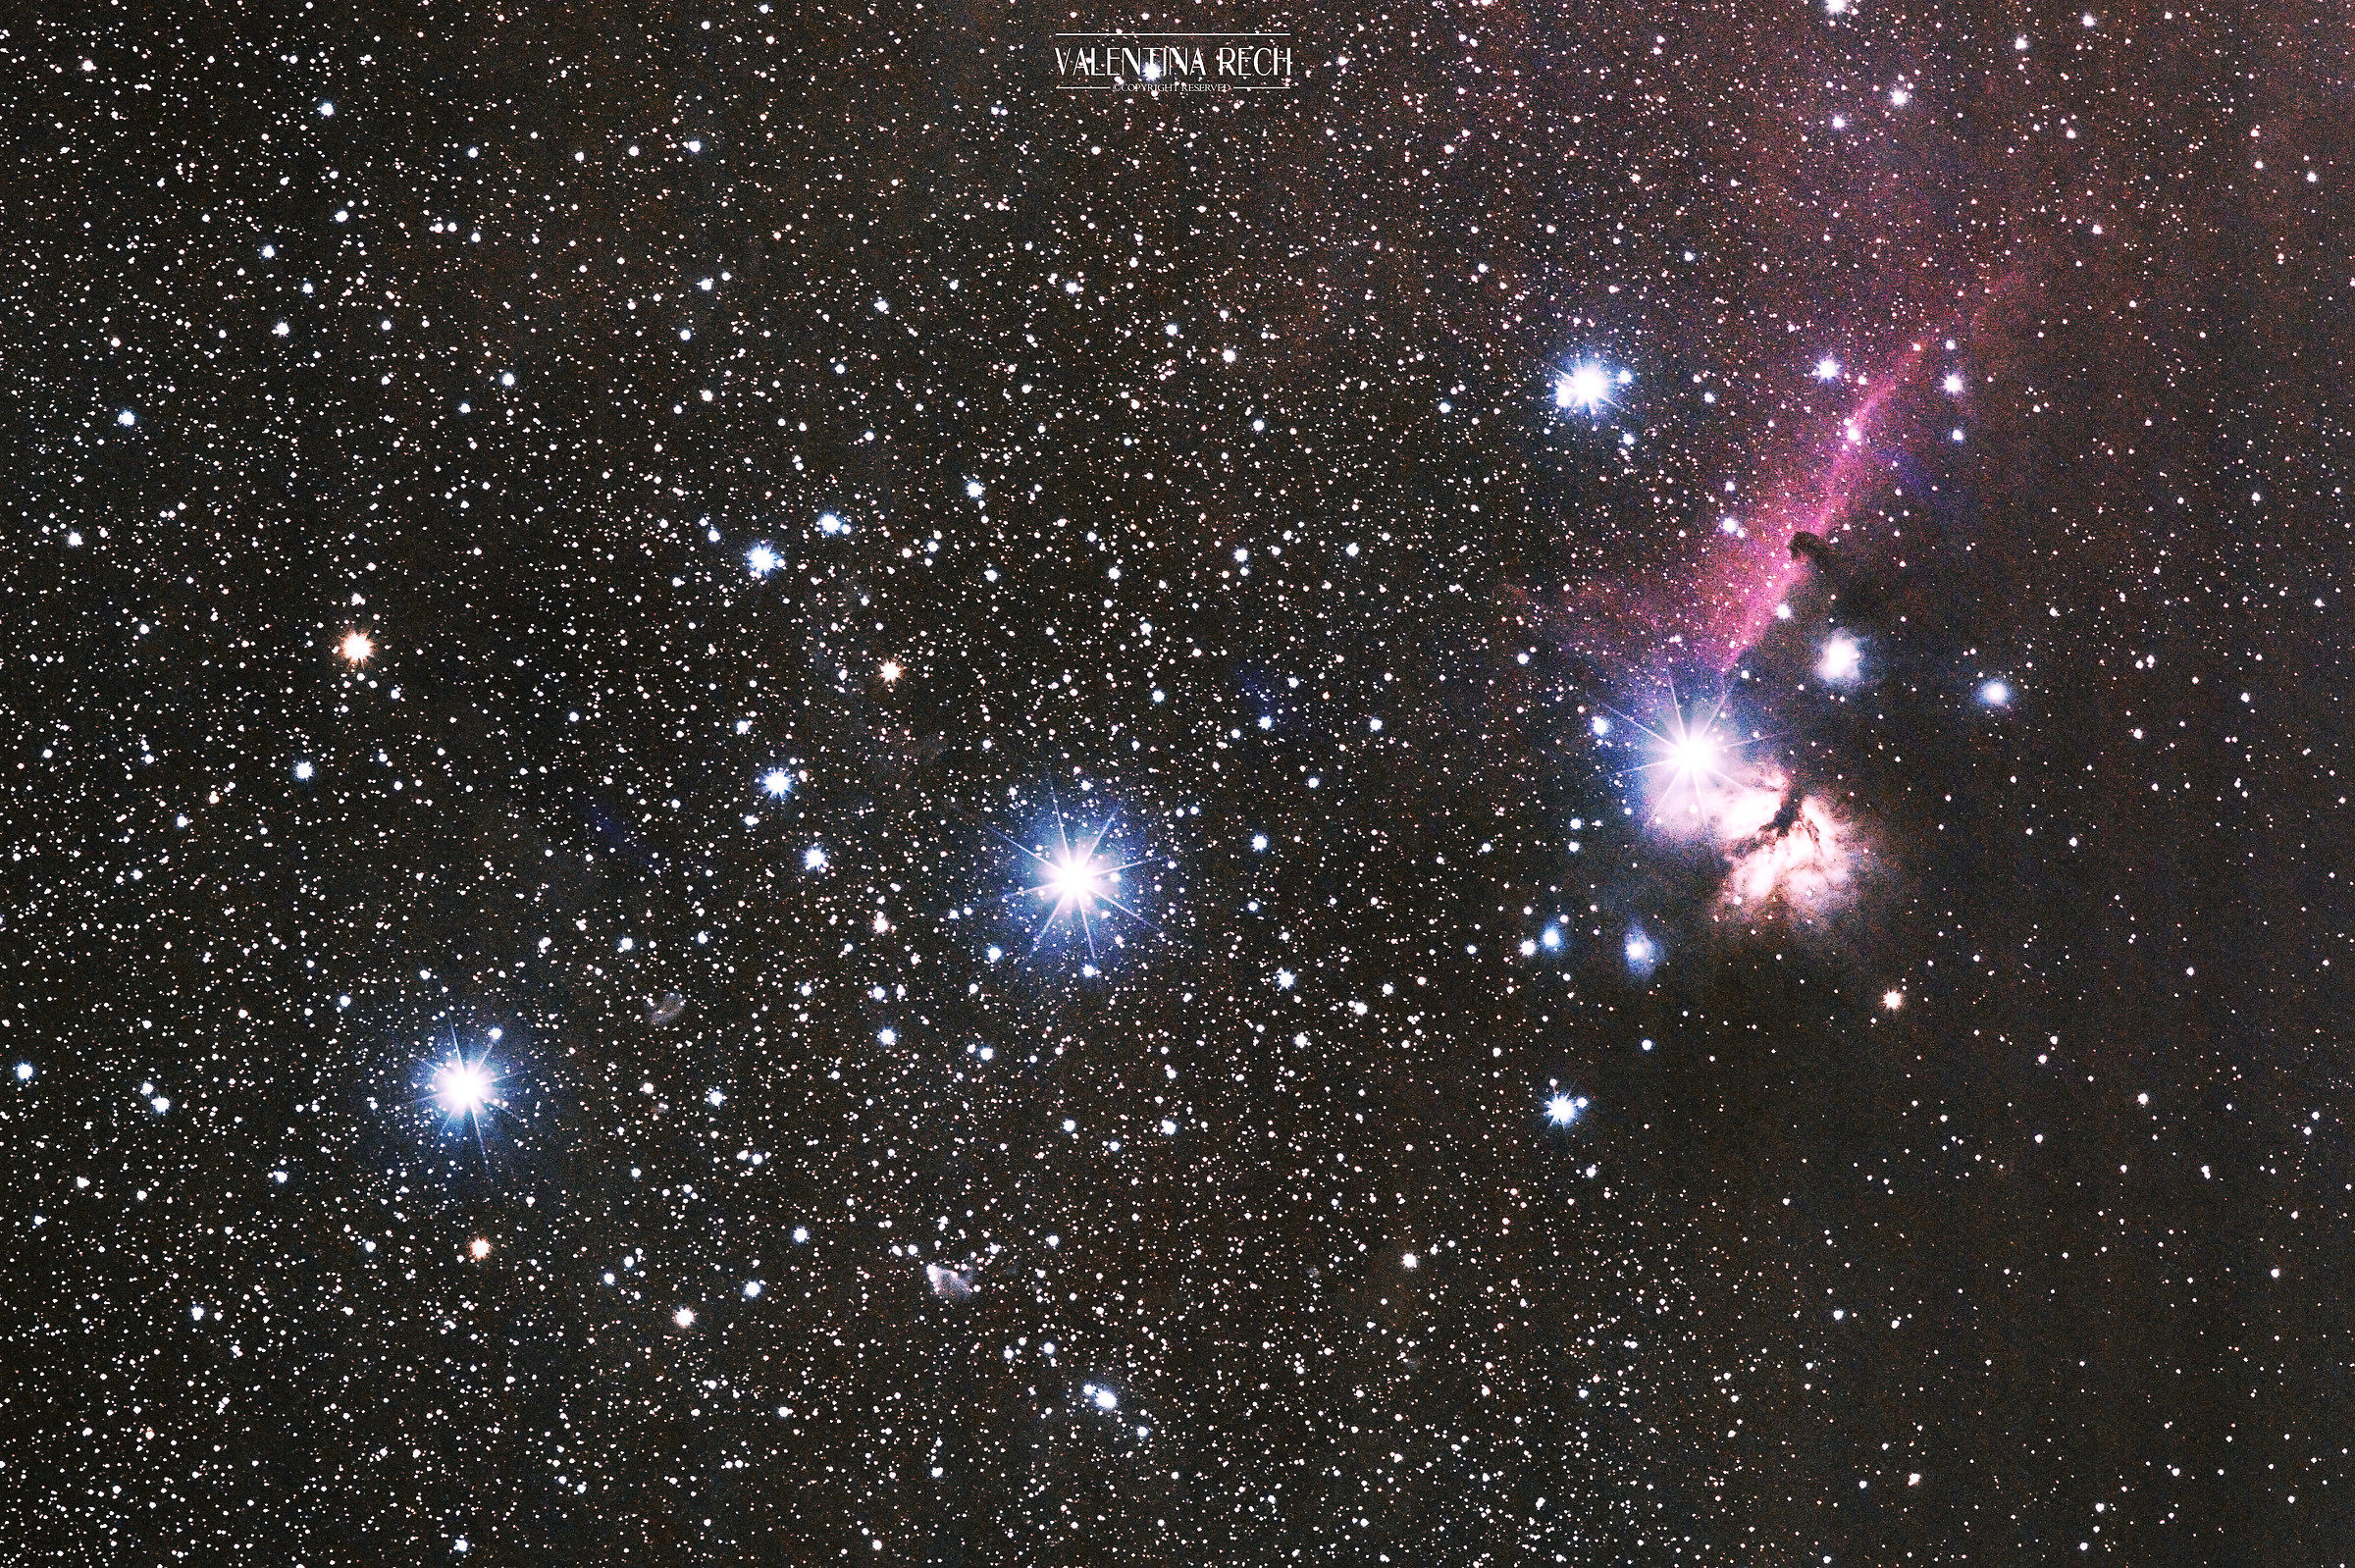 Orion's belt, horse head nebula and flame...